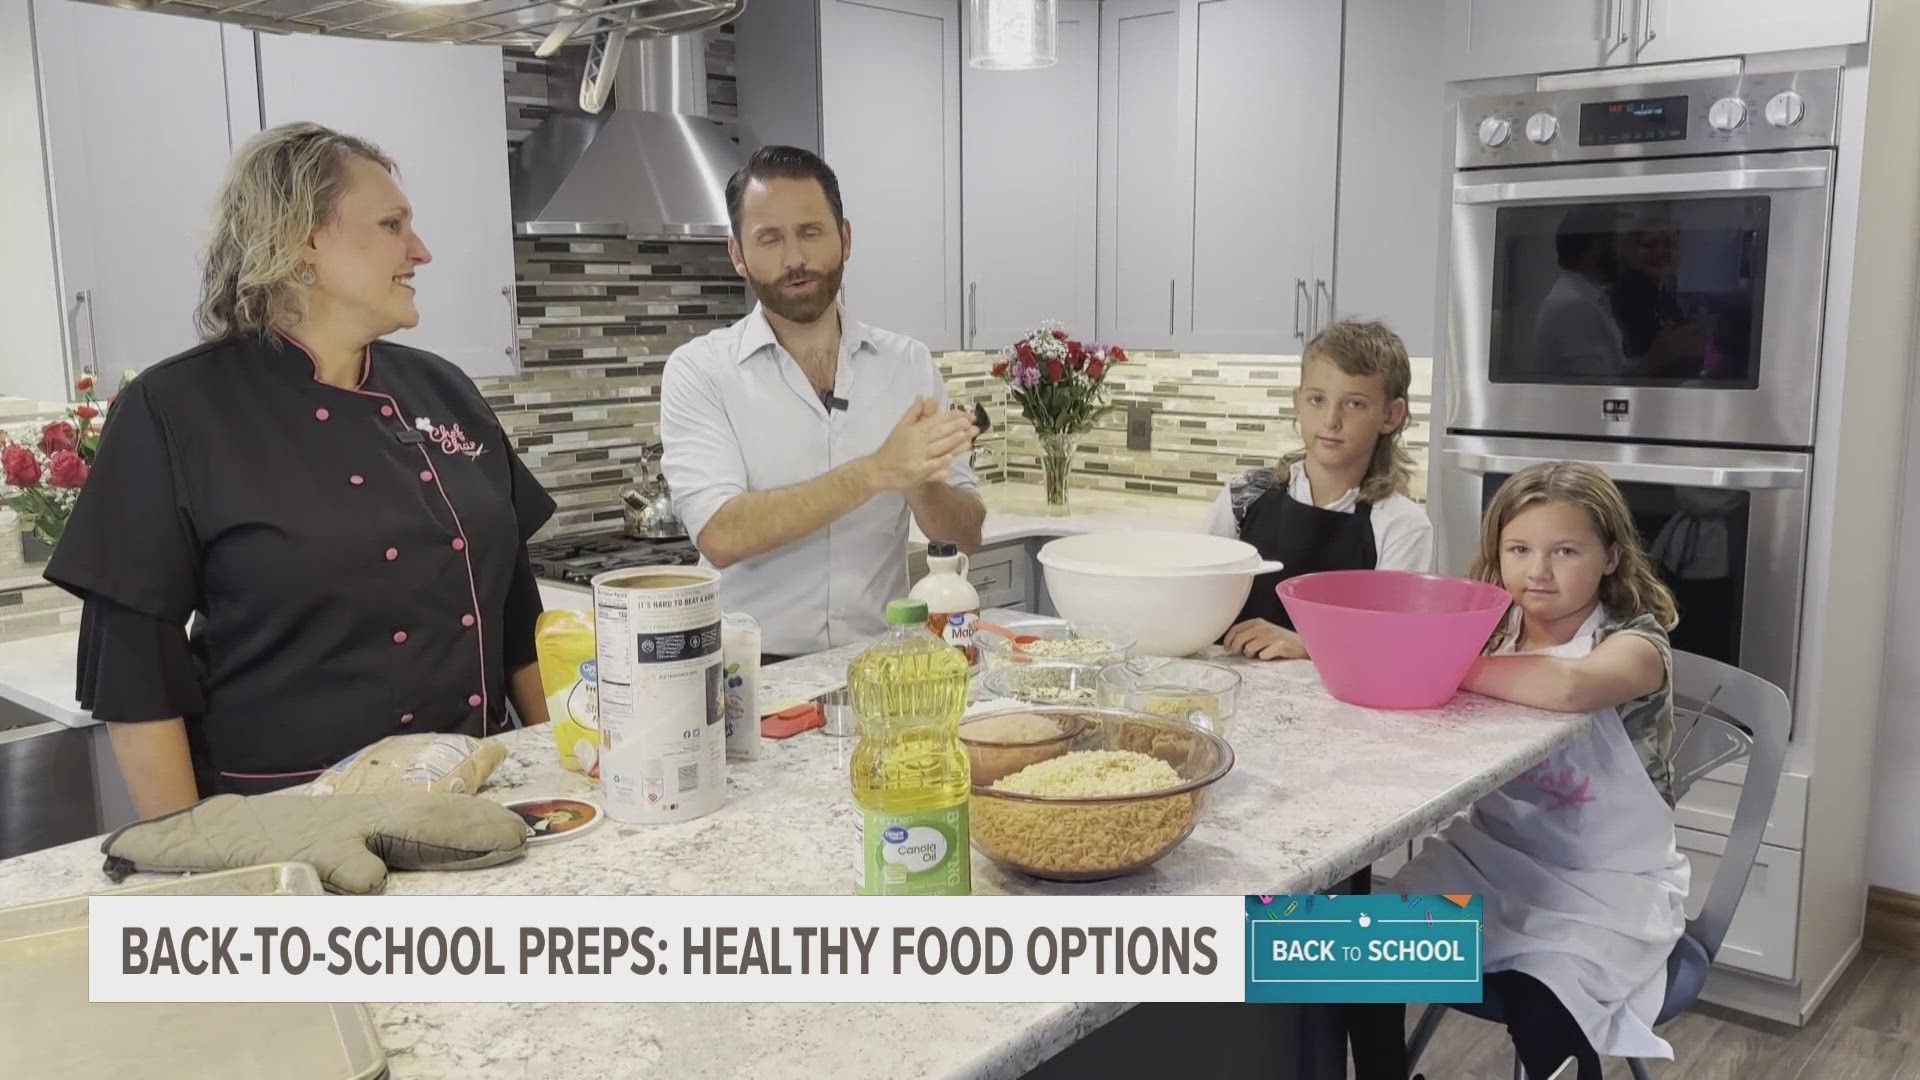 13 ON YOUR SIDE’s Jay Plyburn met with a local chef who shared a simple recipe that will keep your kids fueled up throughout the day.